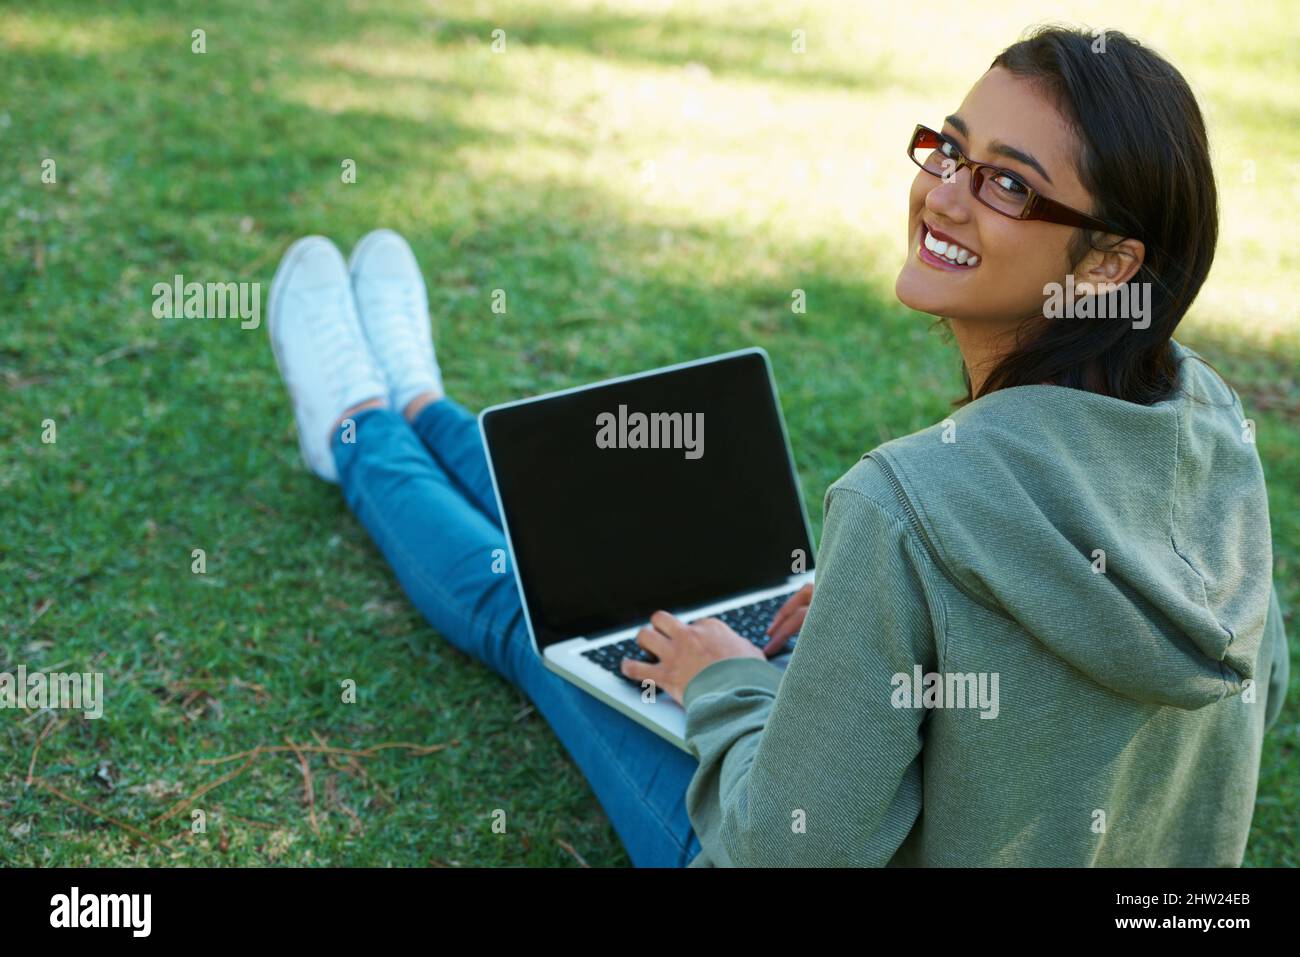 Connected - anywhere, anytime. A young woman working on her laptop in the park. Stock Photo